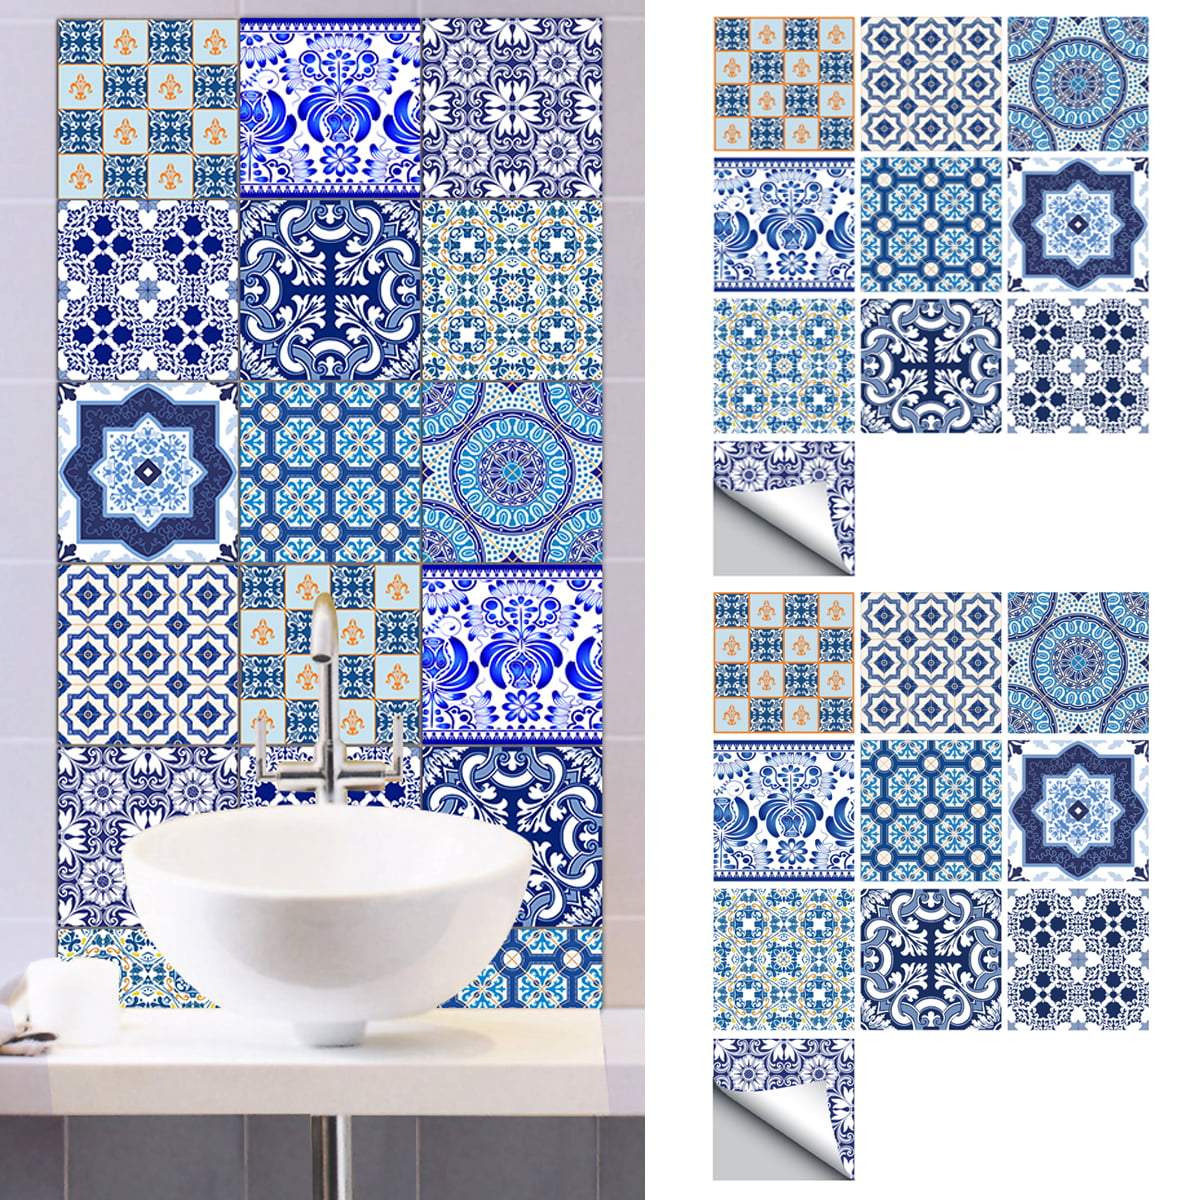 10x 10cm 20 Pcs Decorative Tile Stickers Set Self-Adhesive Wall Tile Stickers Waterproof Oil Proof Durable Removable Backsplash for Kitchen& Bathroom CRY002, 4x 4